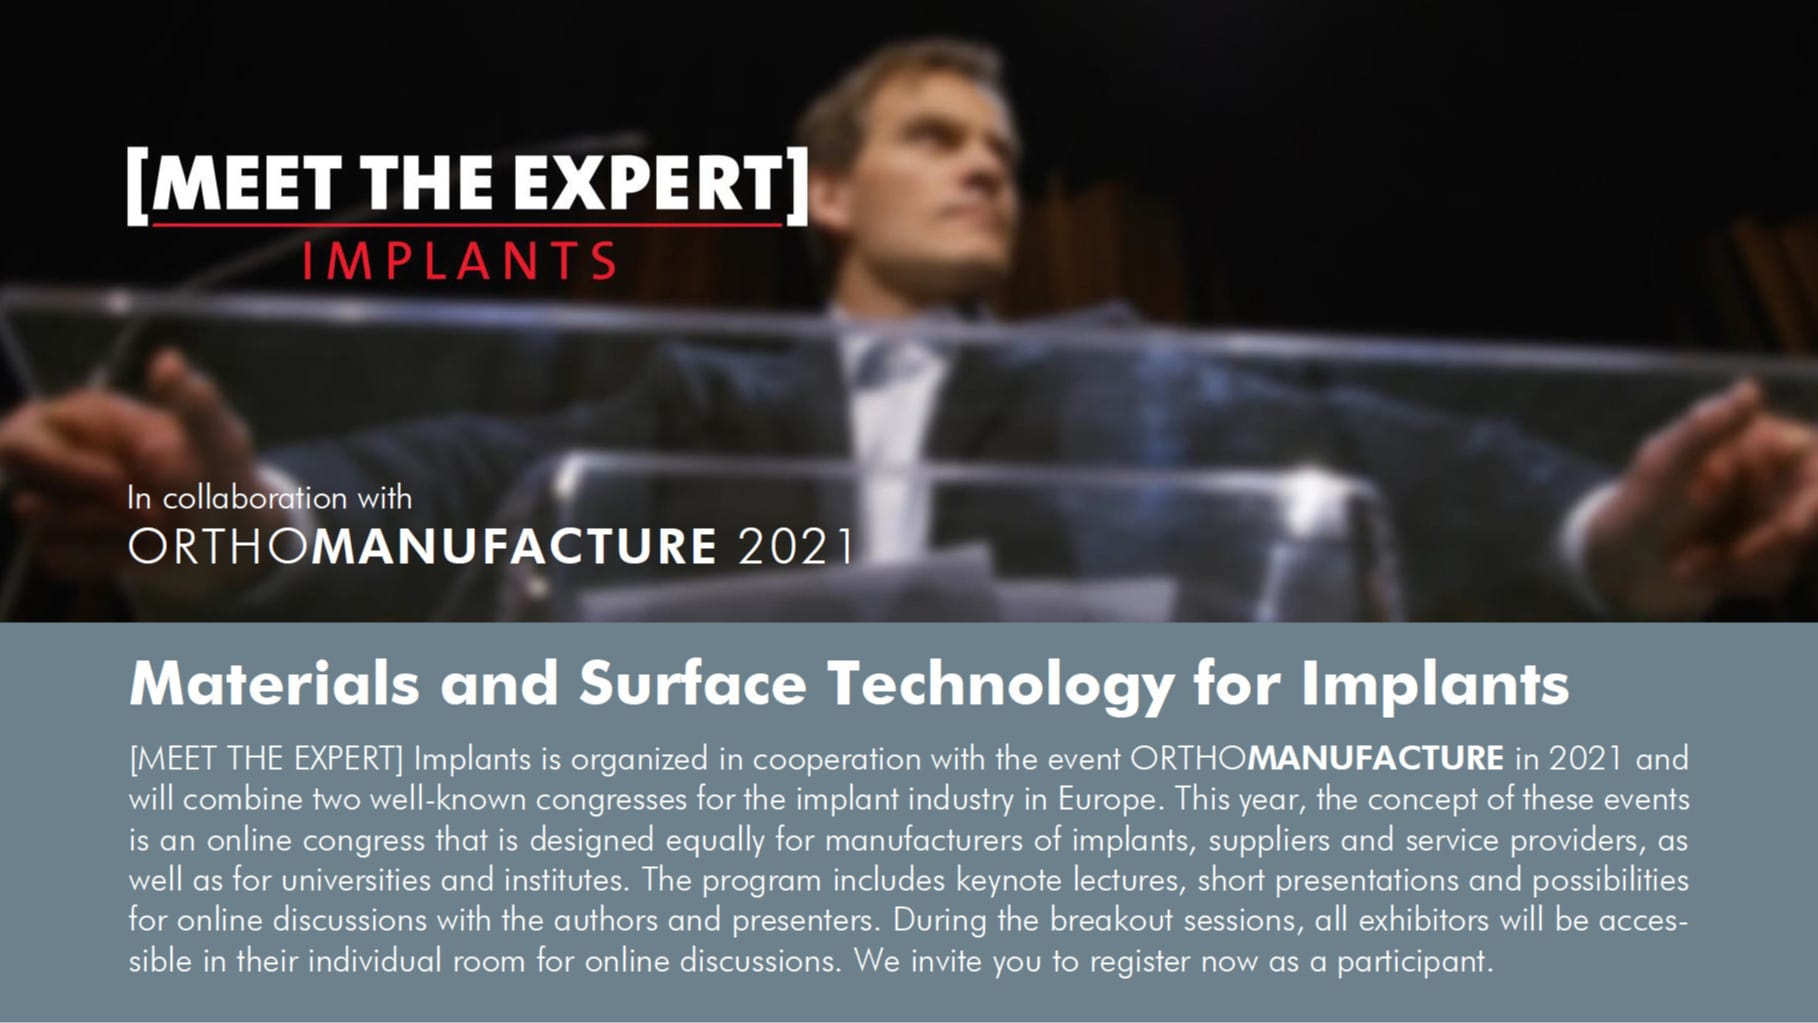 [MEET THE EXPERT] Implants / ORTHOMANUFACTURE 2021, 28/29 April, Online event